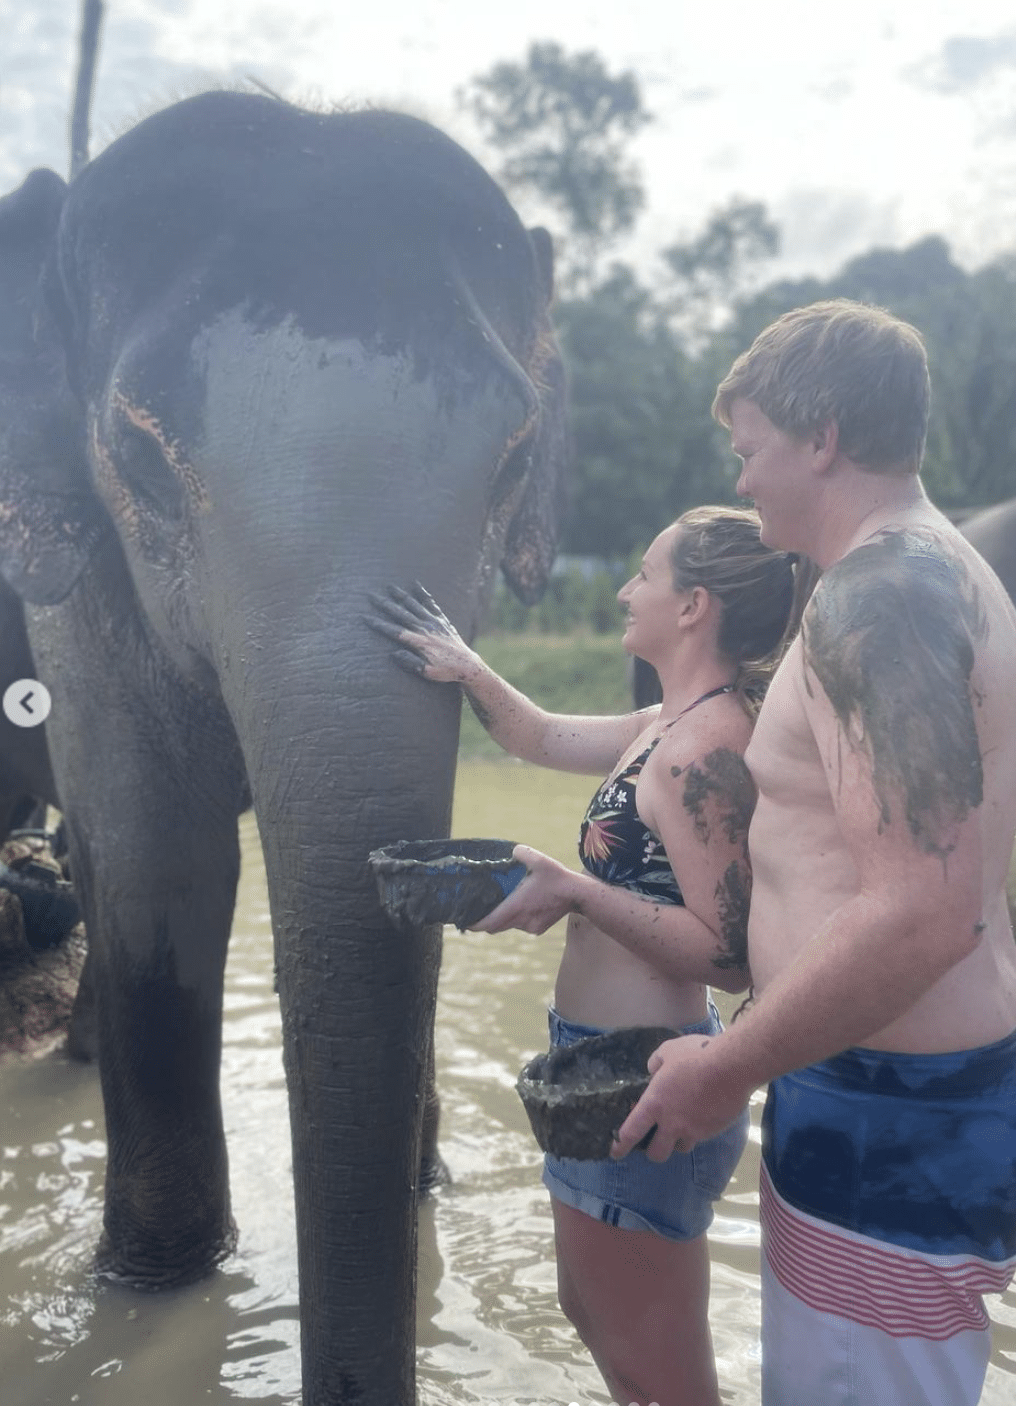 man and woman wear swimsuits while touching elephants trunk